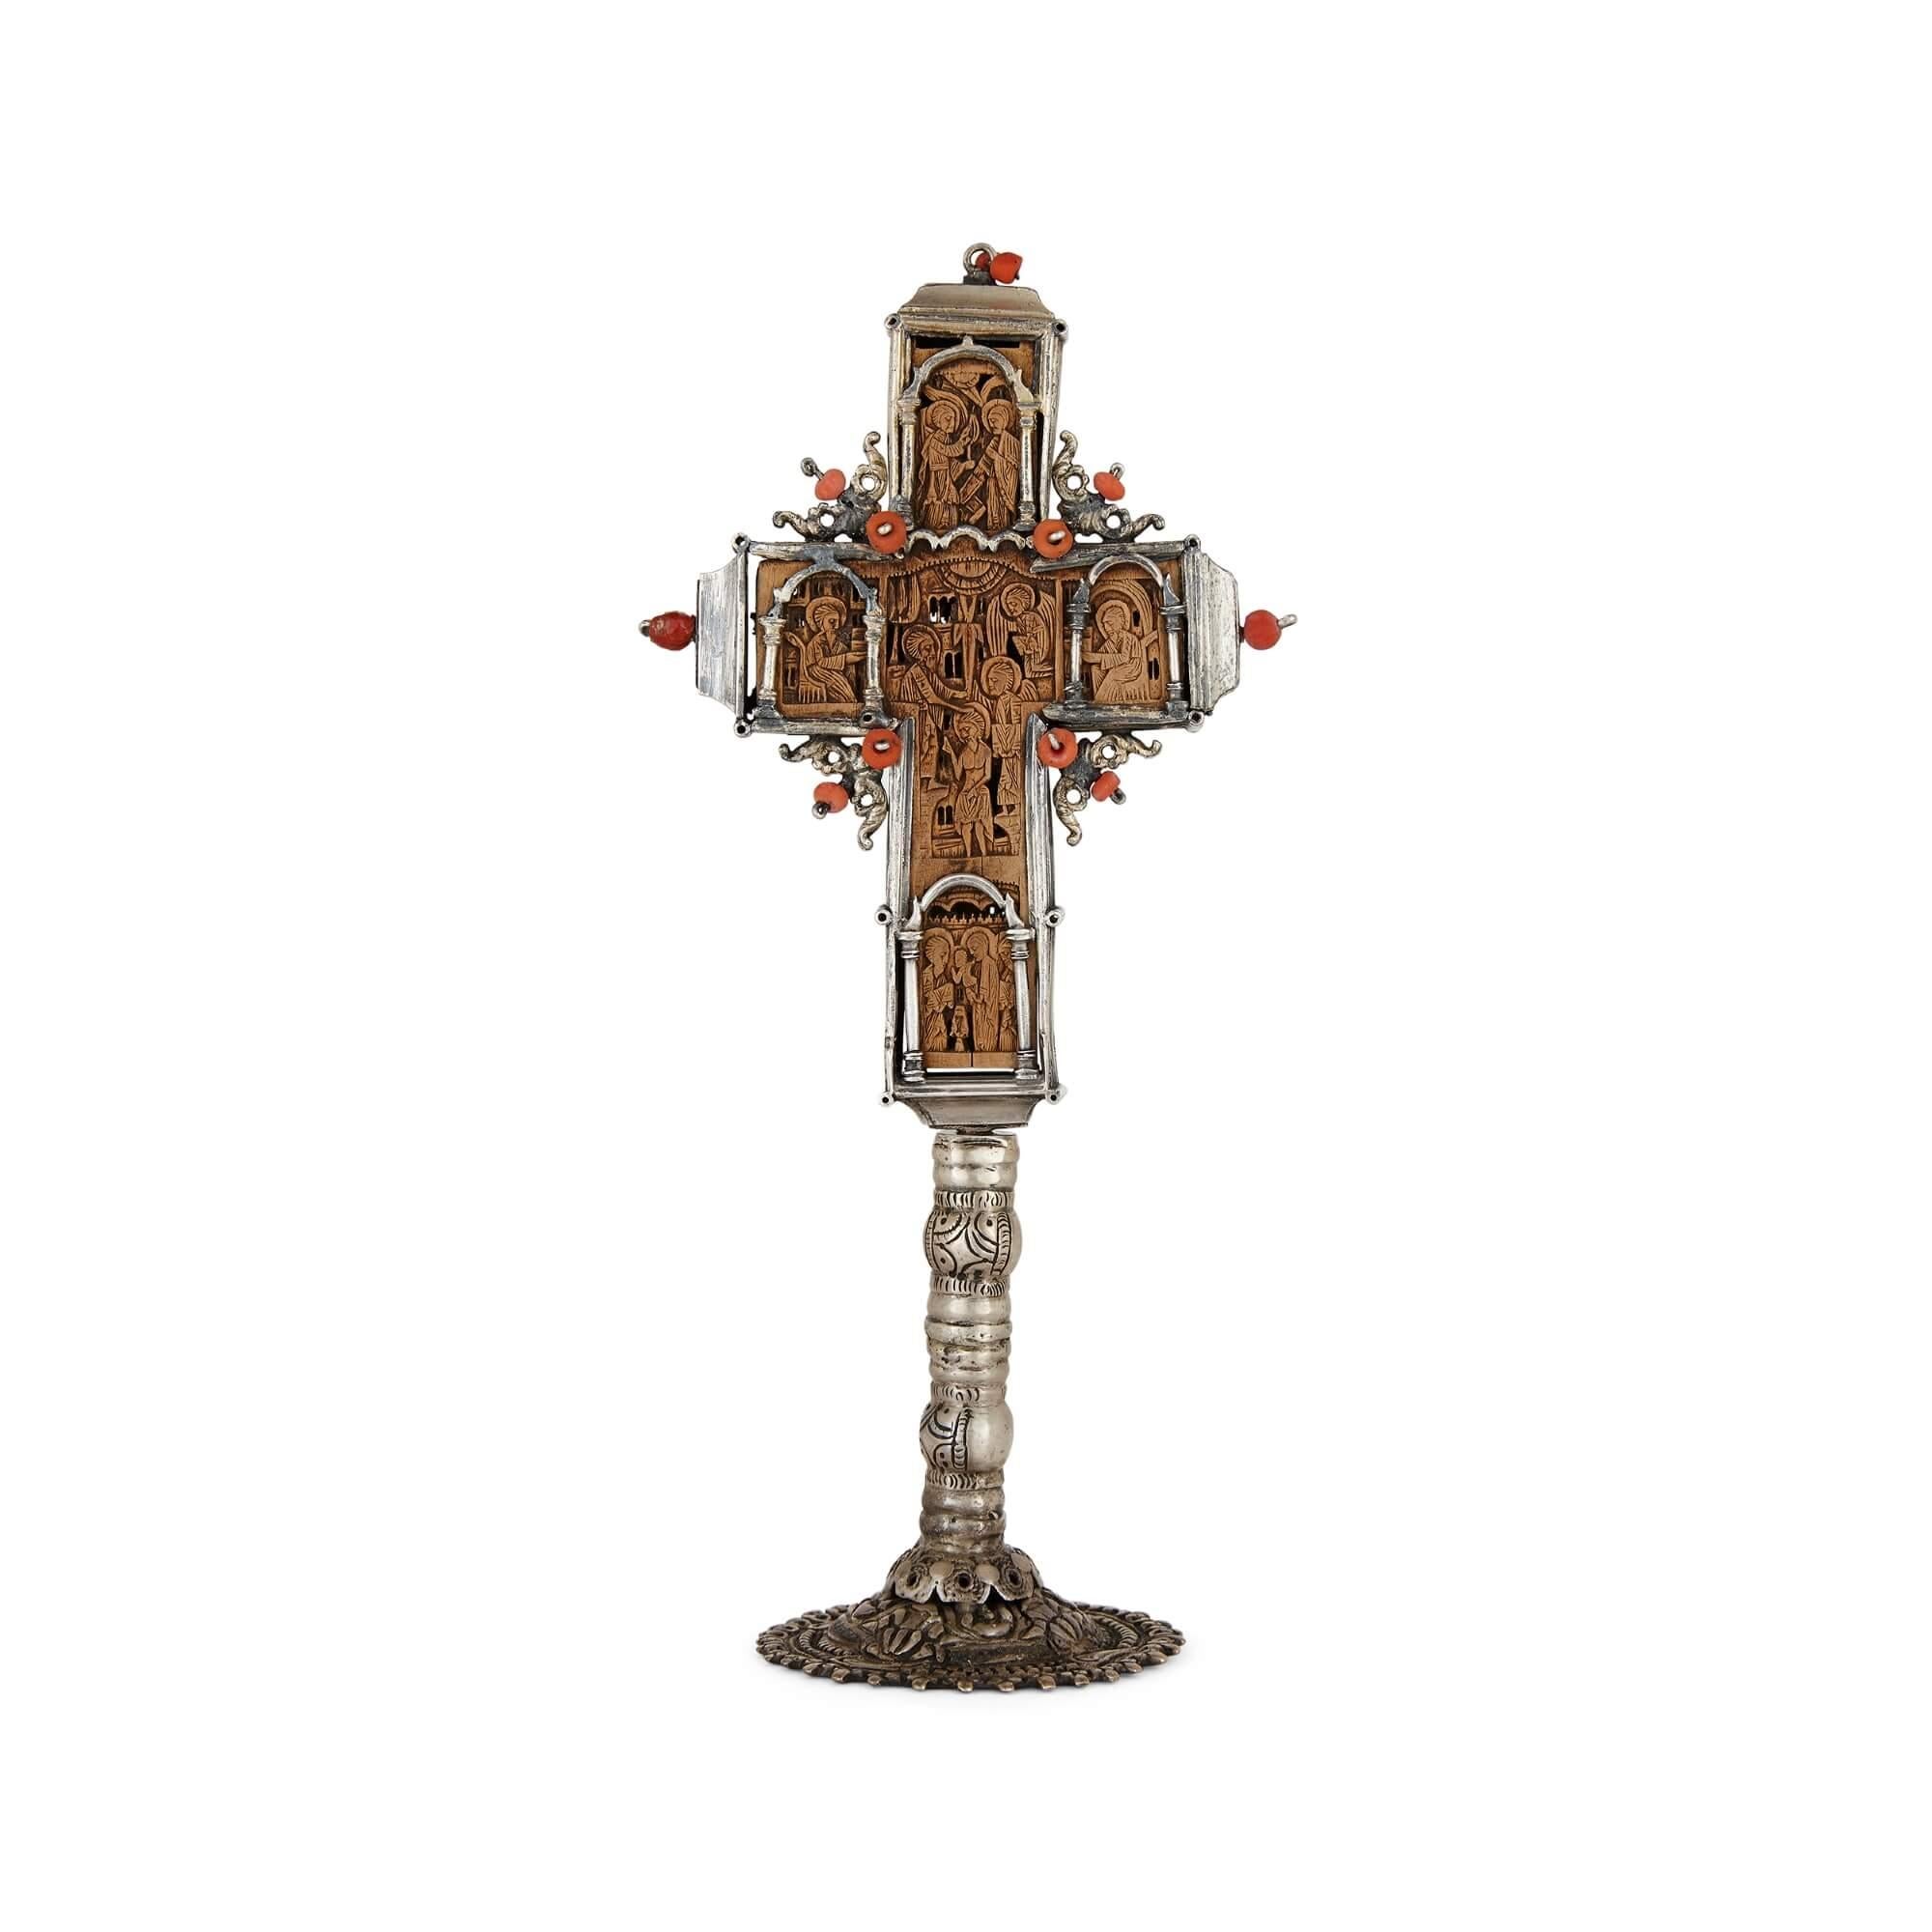 Antique Greek Orthodox carved wood and silver cross
Greek, 18th Century
Height 18.5cm, width 8.5cm, depth 6.5cm

This superb piece is a Greek Orthodox cross, crafted from silver, wood, and coral. The cross is comprised of a relief carved wooden